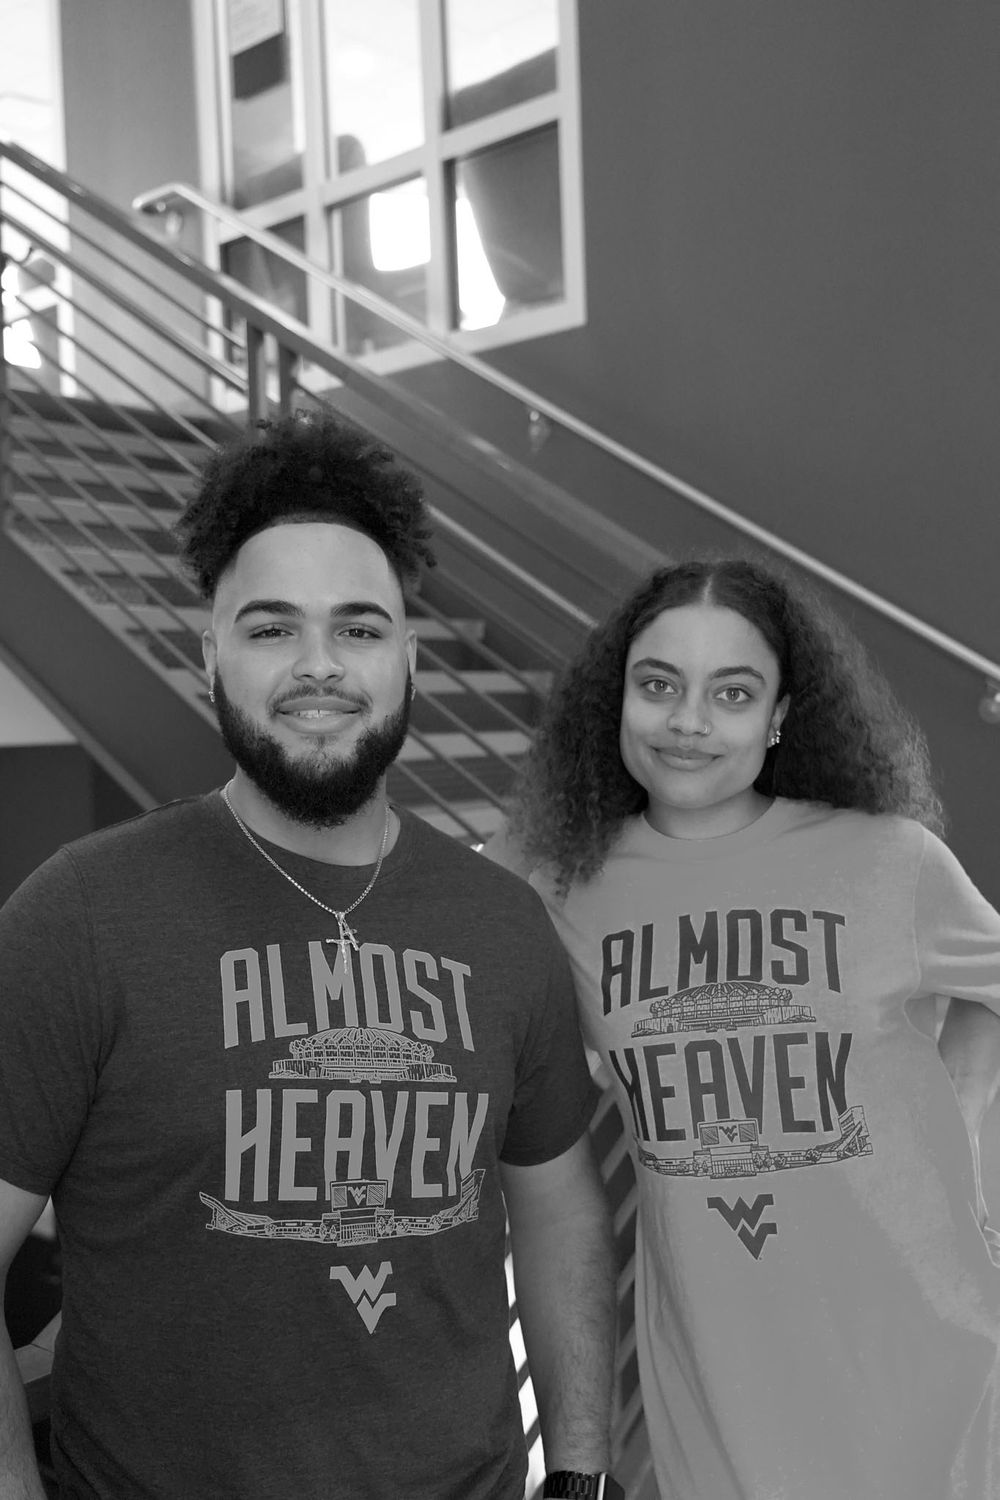 black and white photo of Male and female students on staircase in WVU shirts